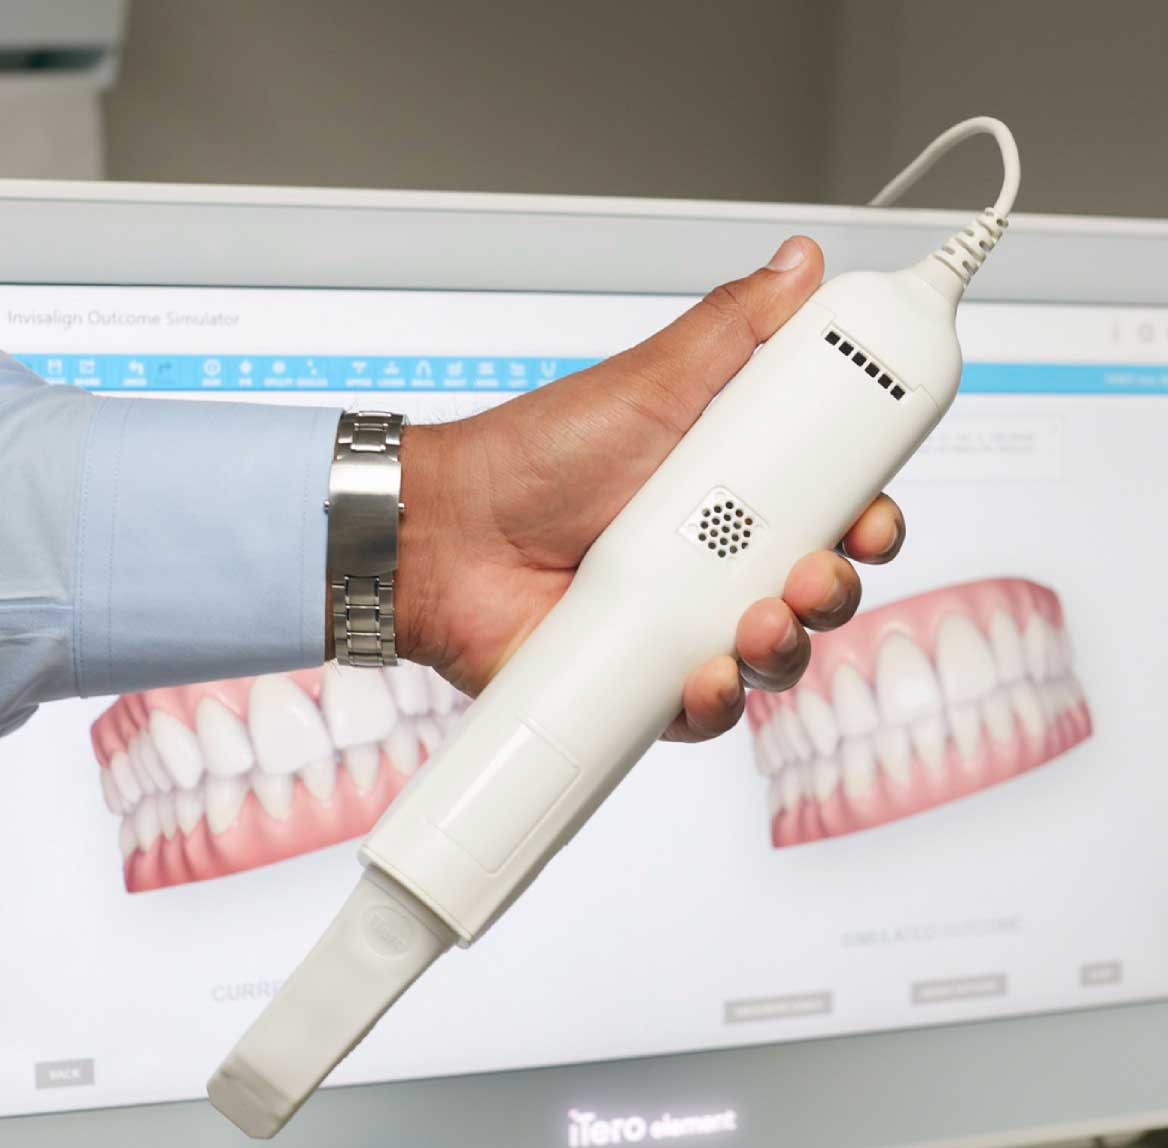 Itero scanner to boost your practice - Invisalign UK